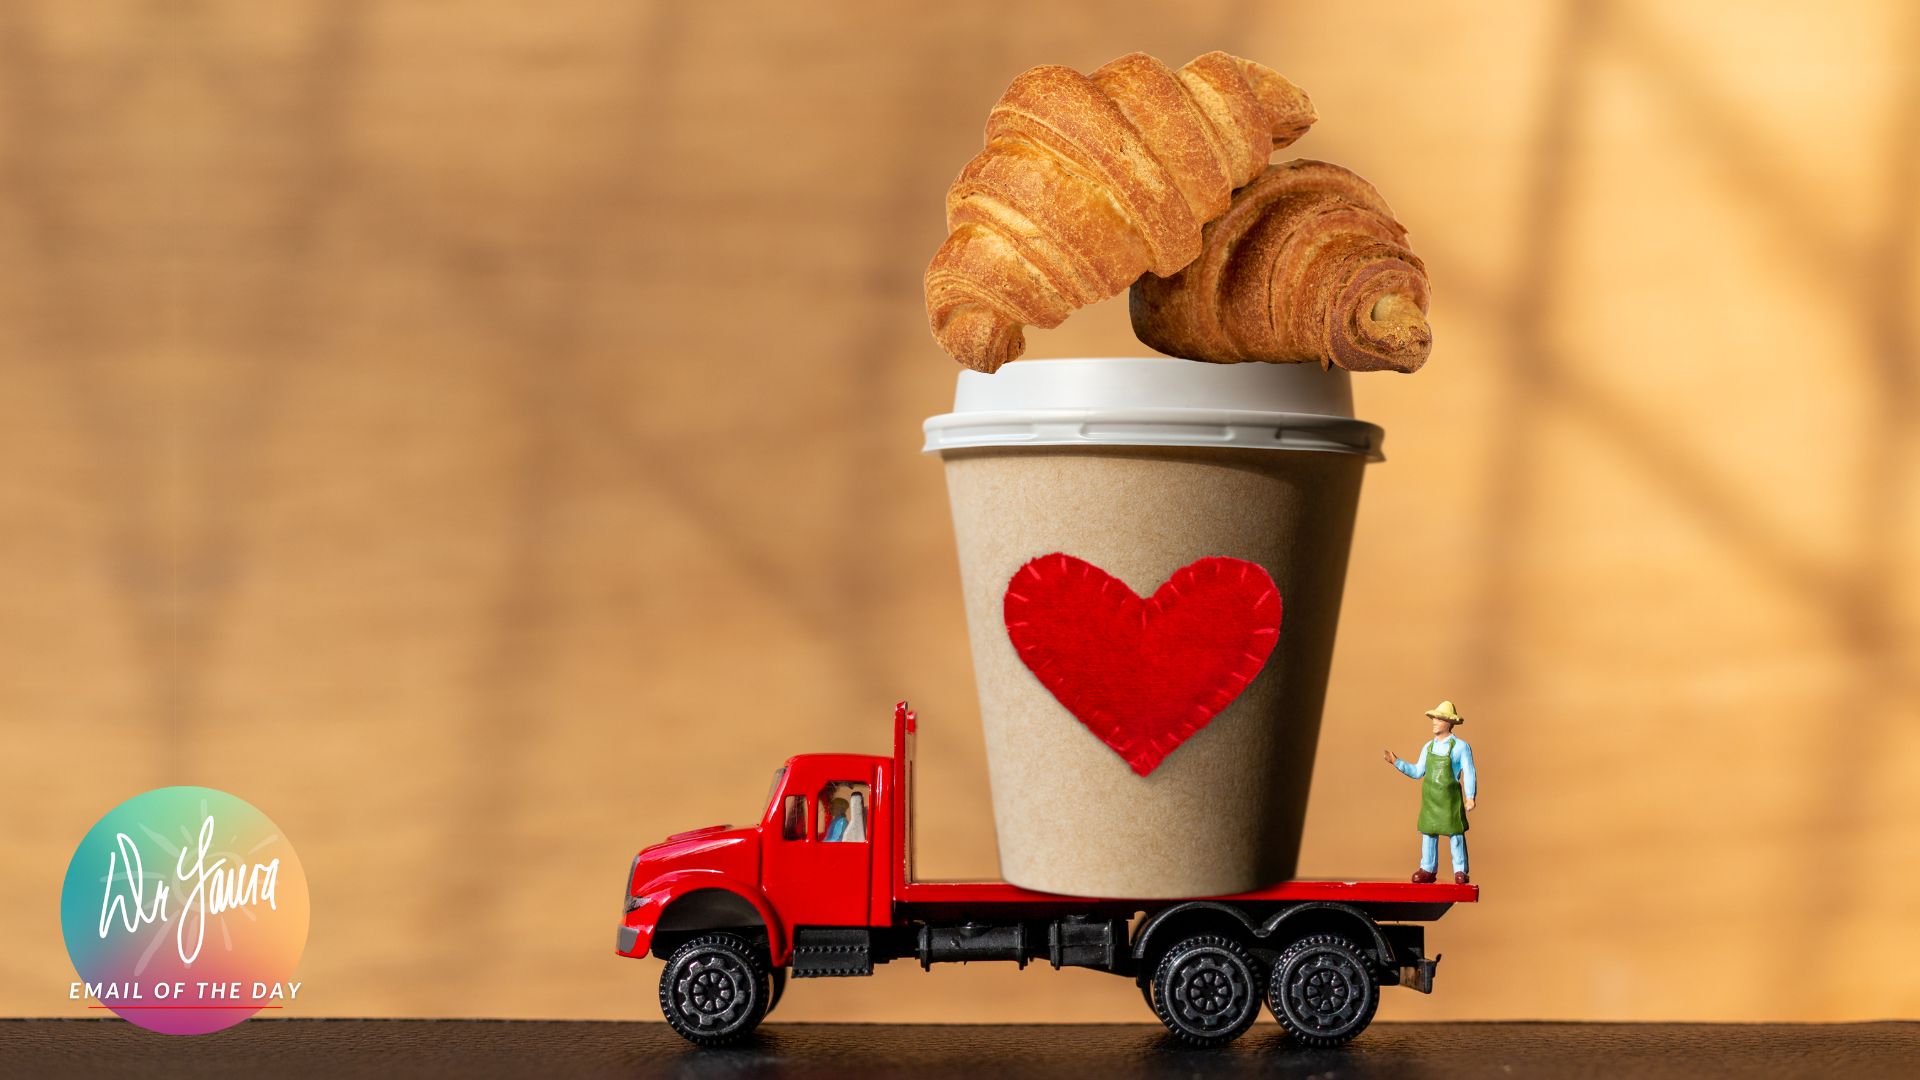 A croissant sits on a to-go coffee cup on a red truck